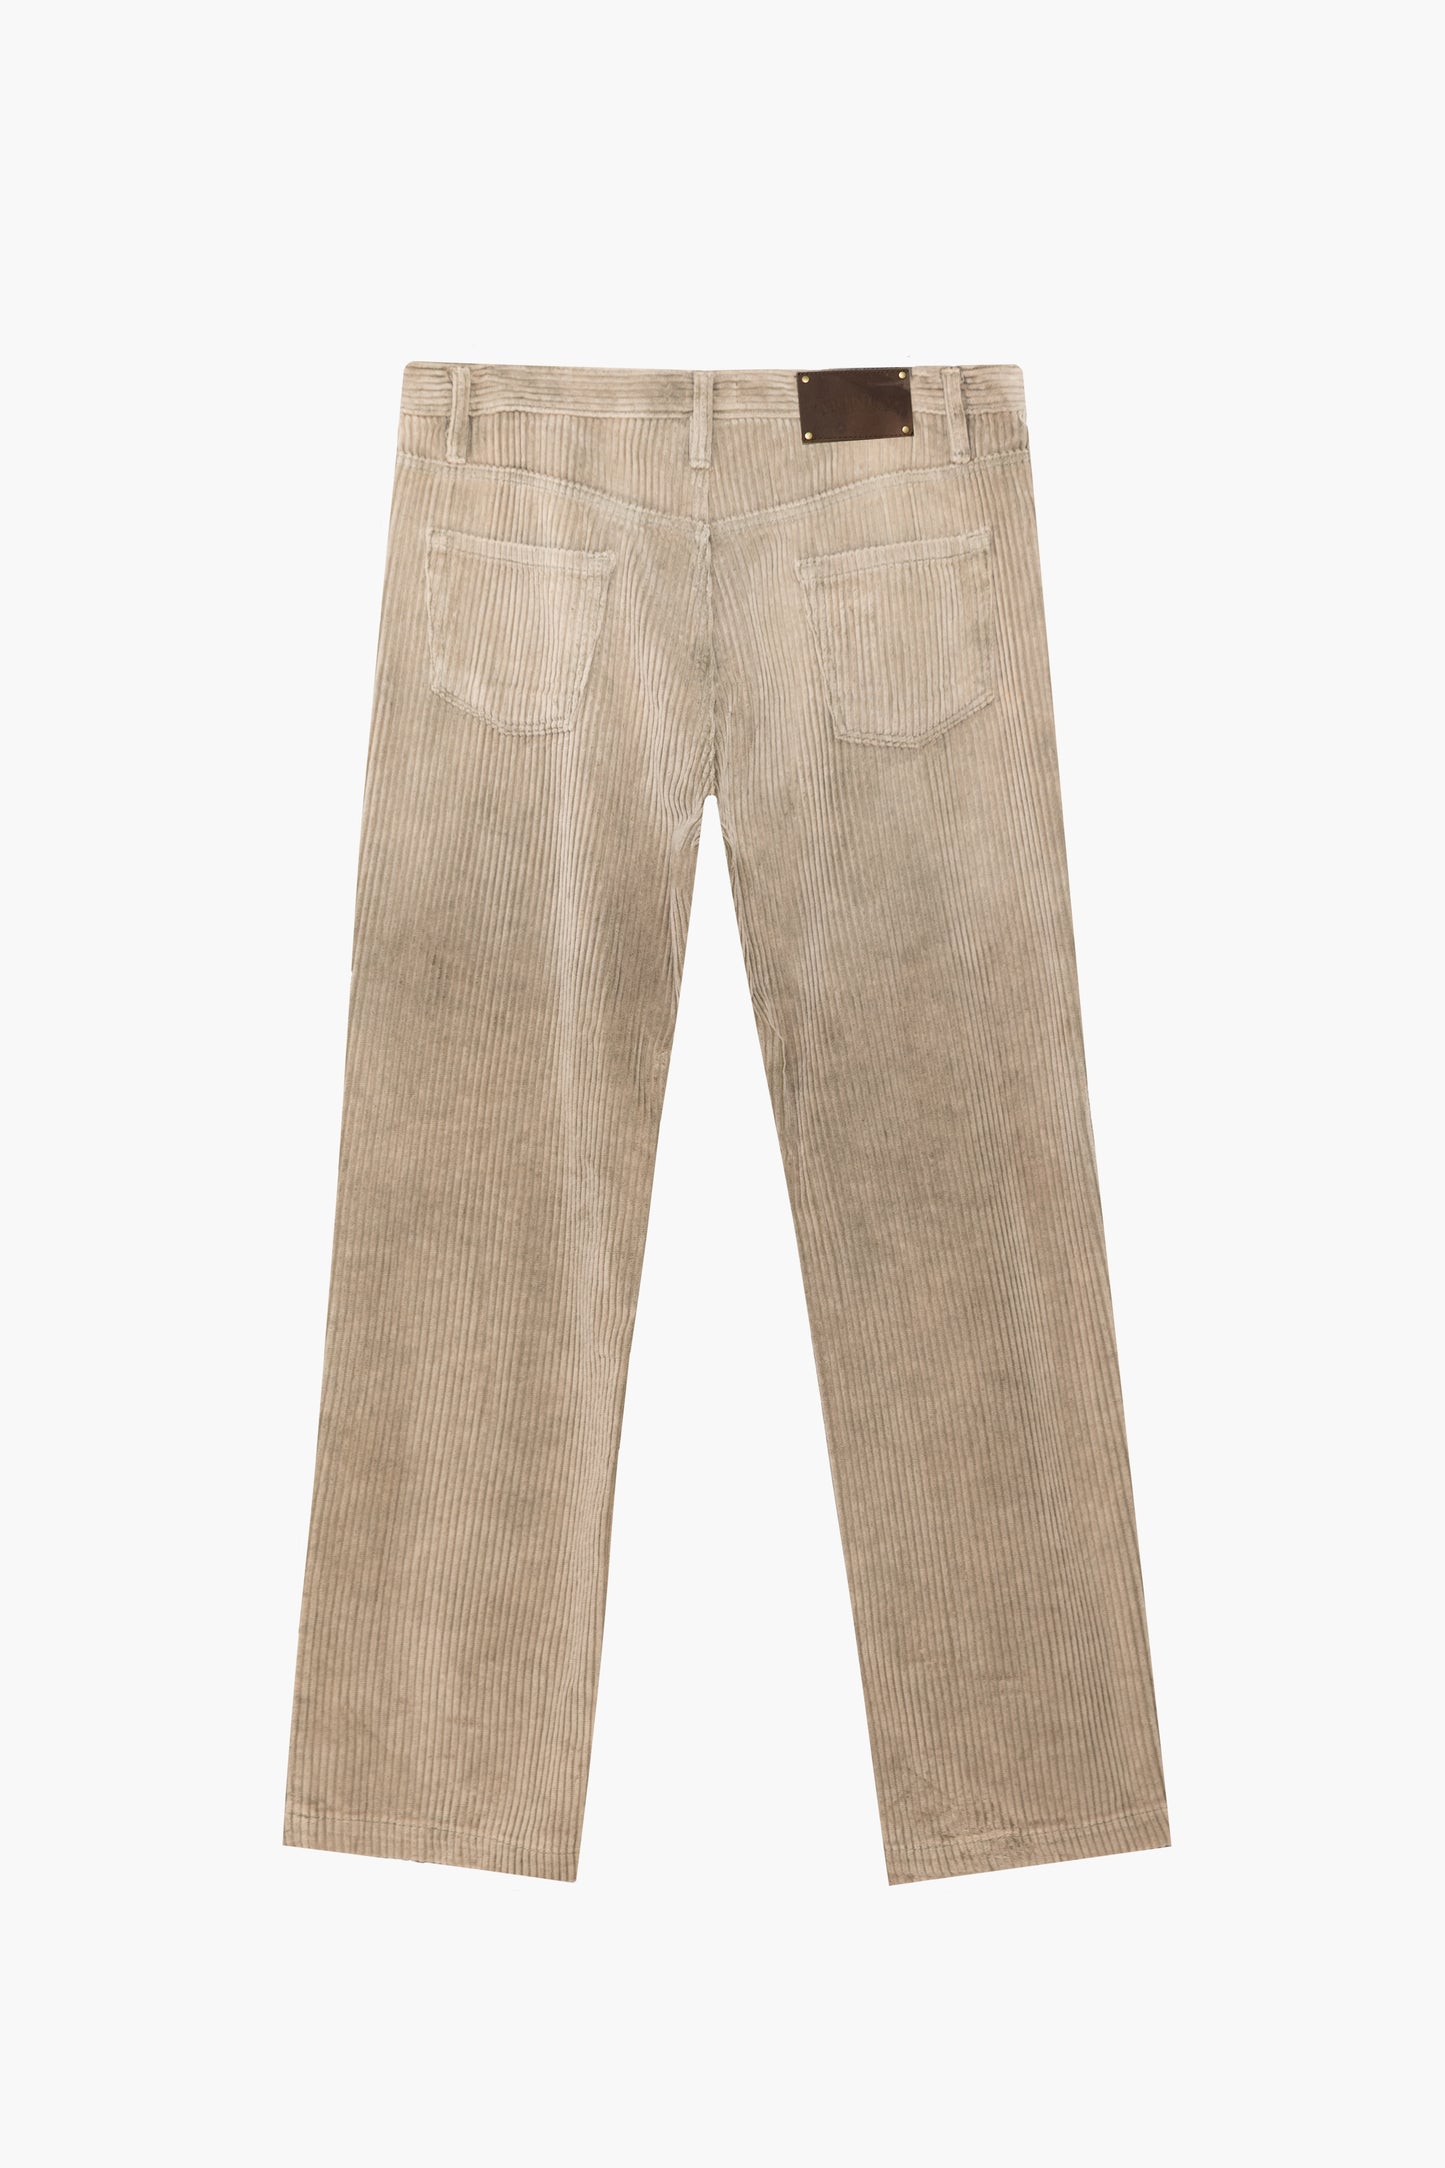 Buttermilk Washed Corduroy Pant